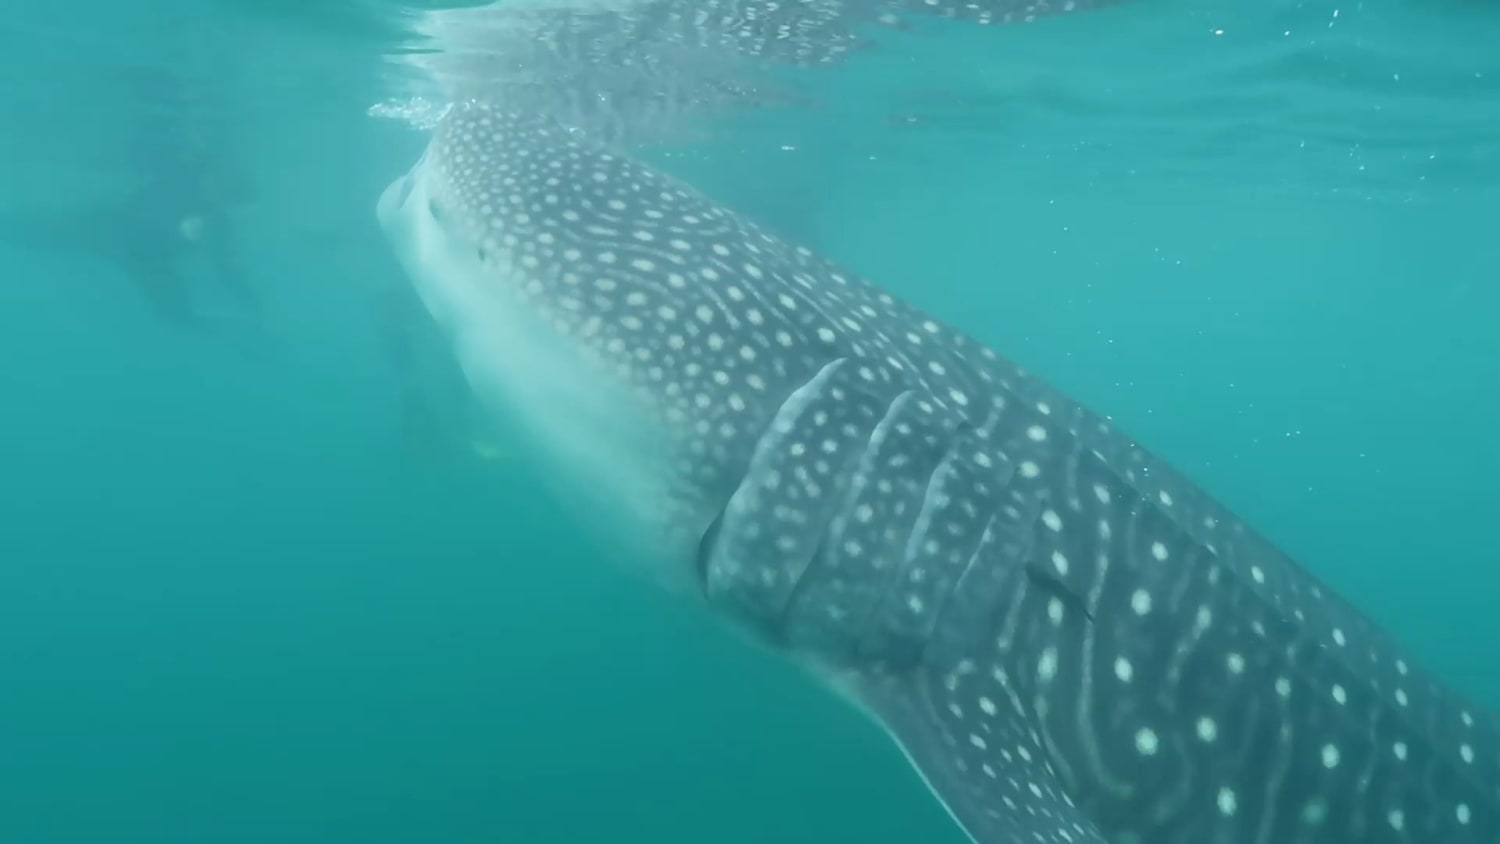 Just love swimming with these gentle behemoths. Can't wait for whale shark season at our resort in Mexico this fall...